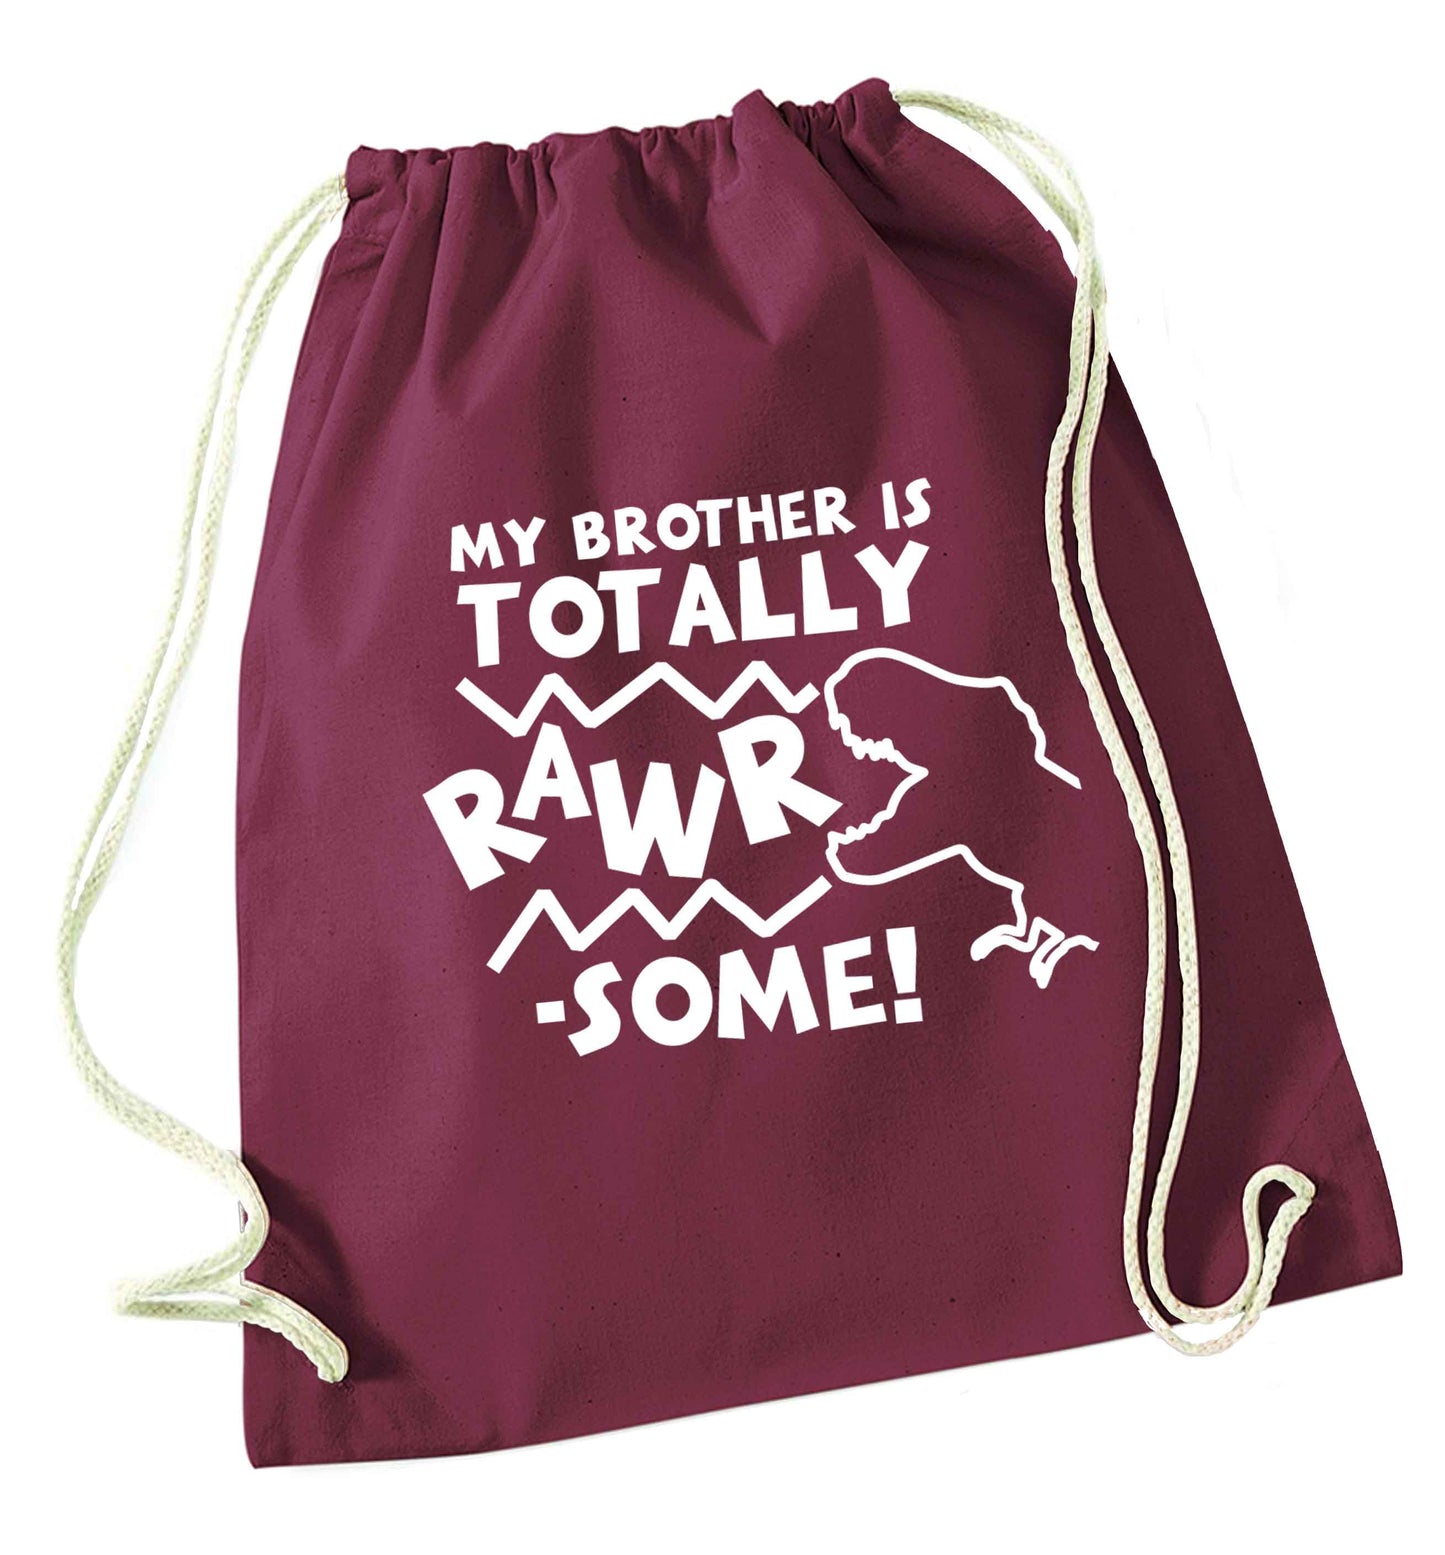 My brother is totally rawrsome maroon drawstring bag